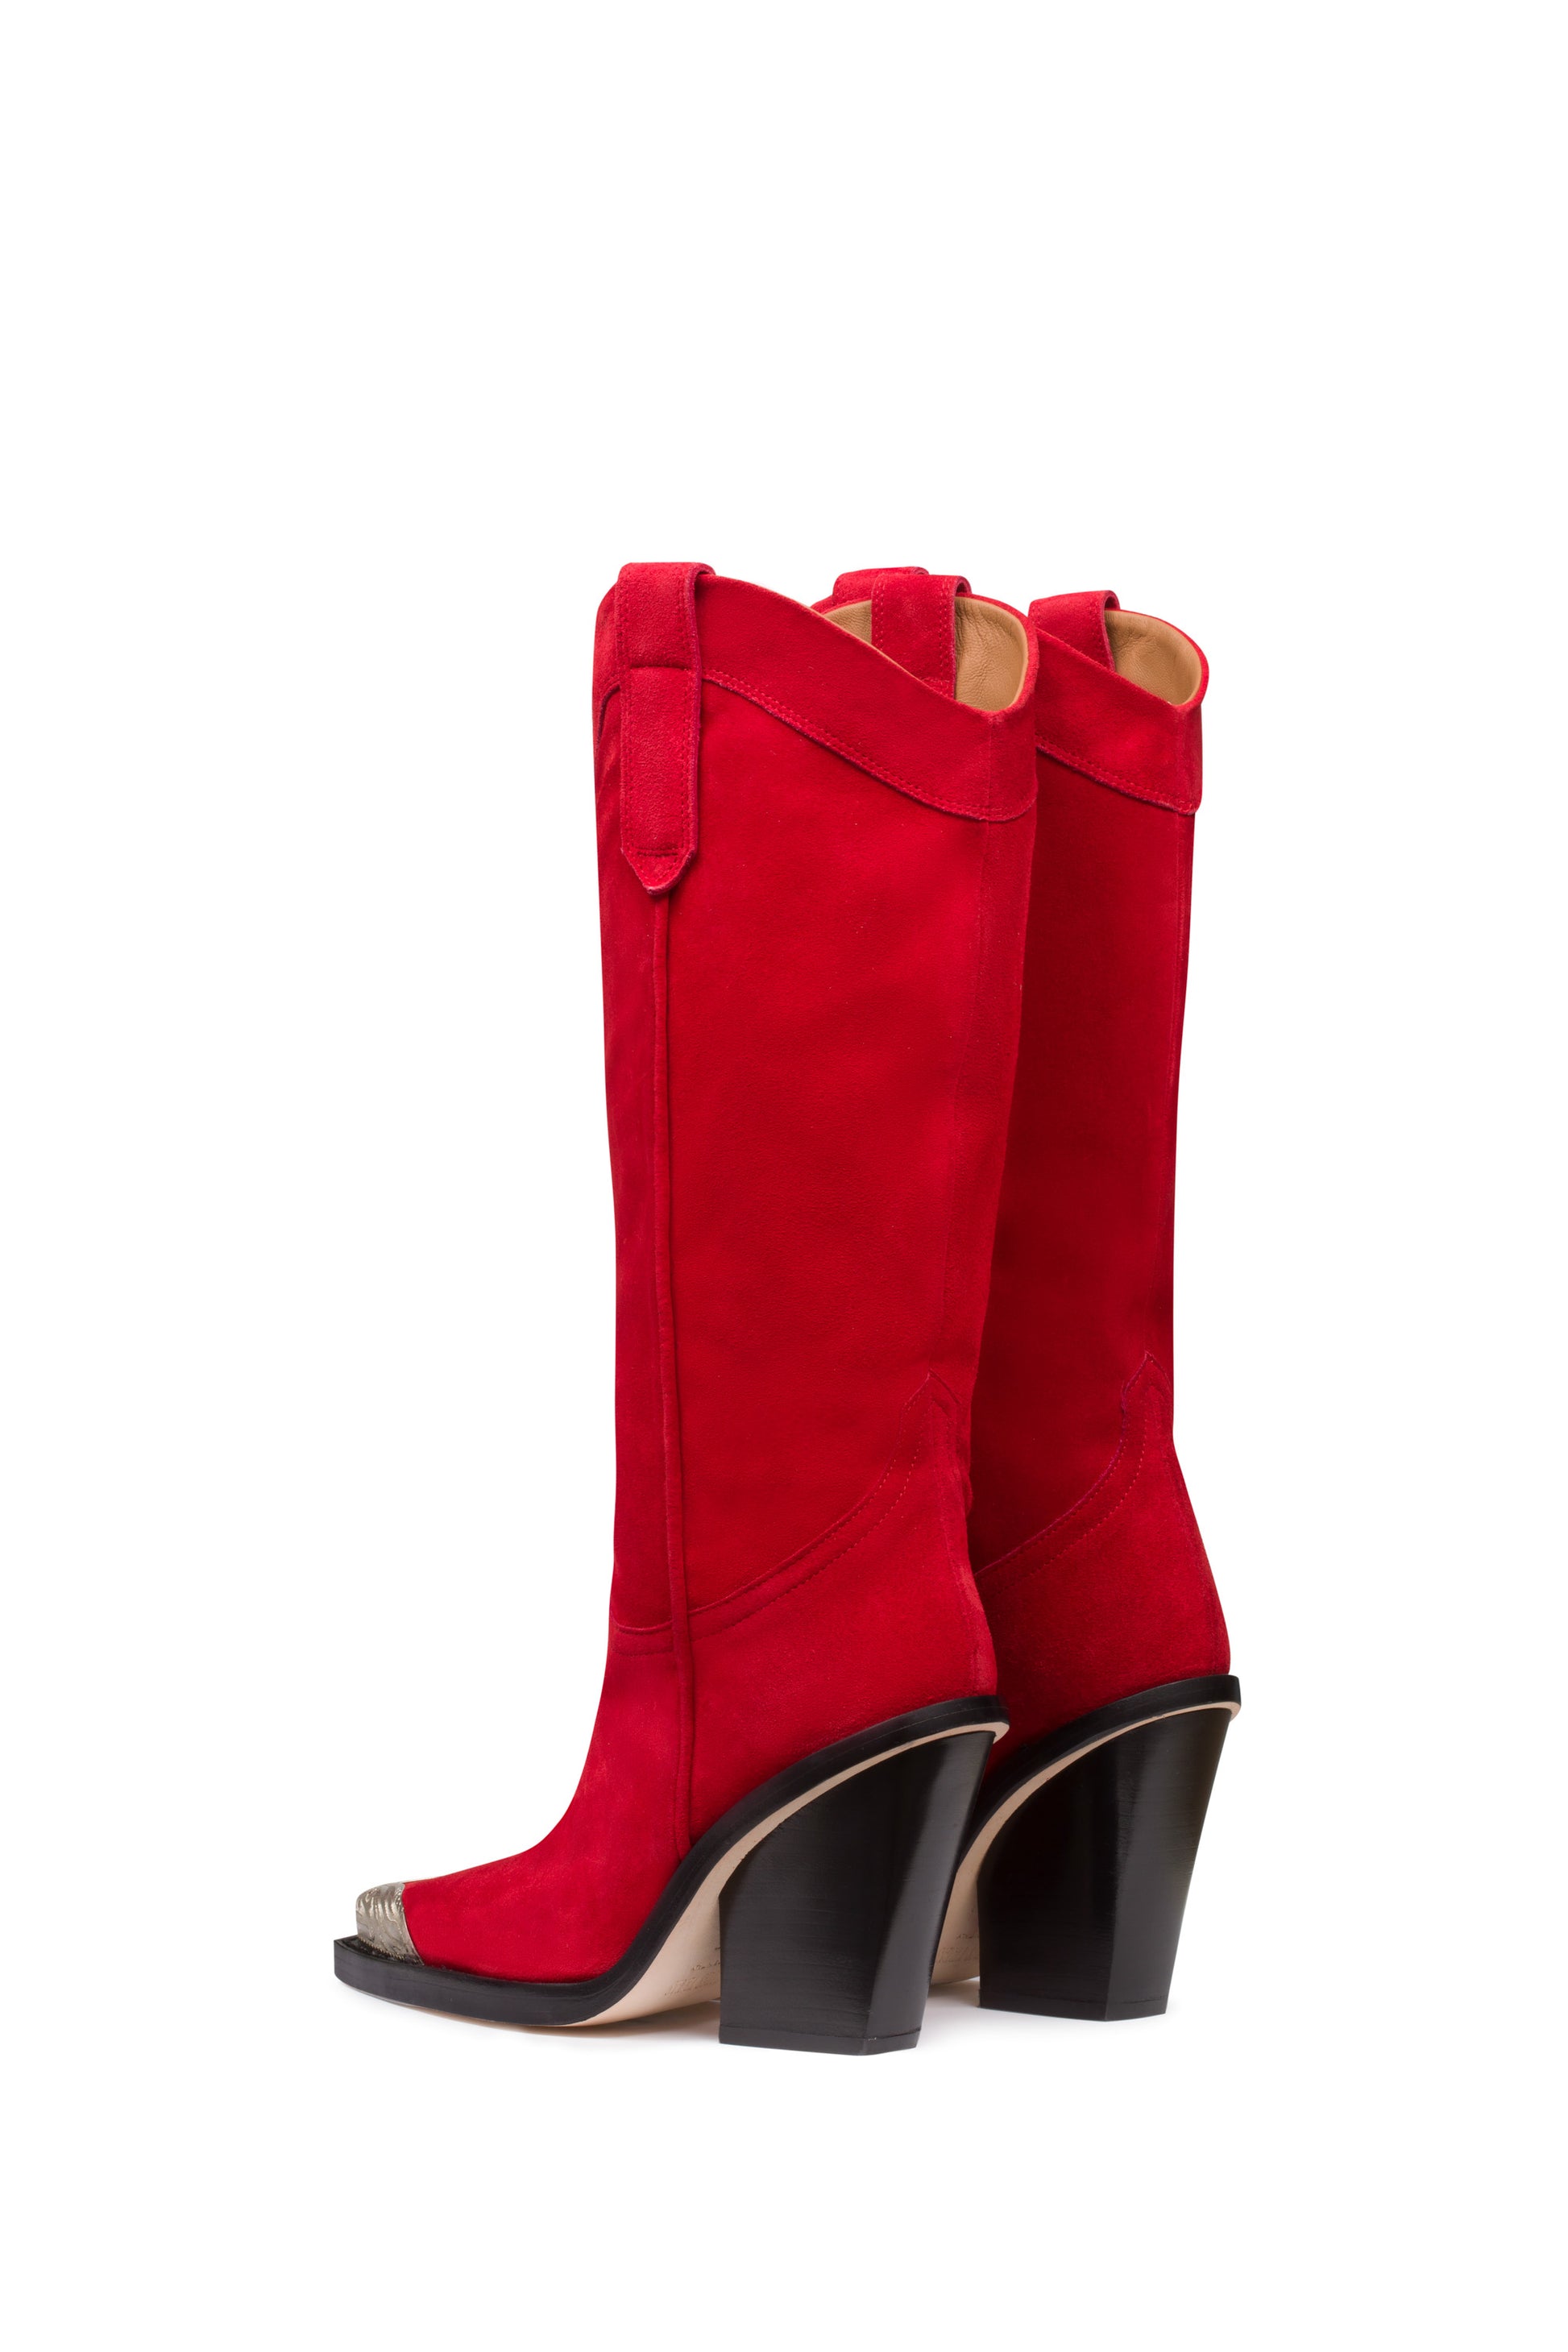 Red calf suede boots with metallic toe - Back